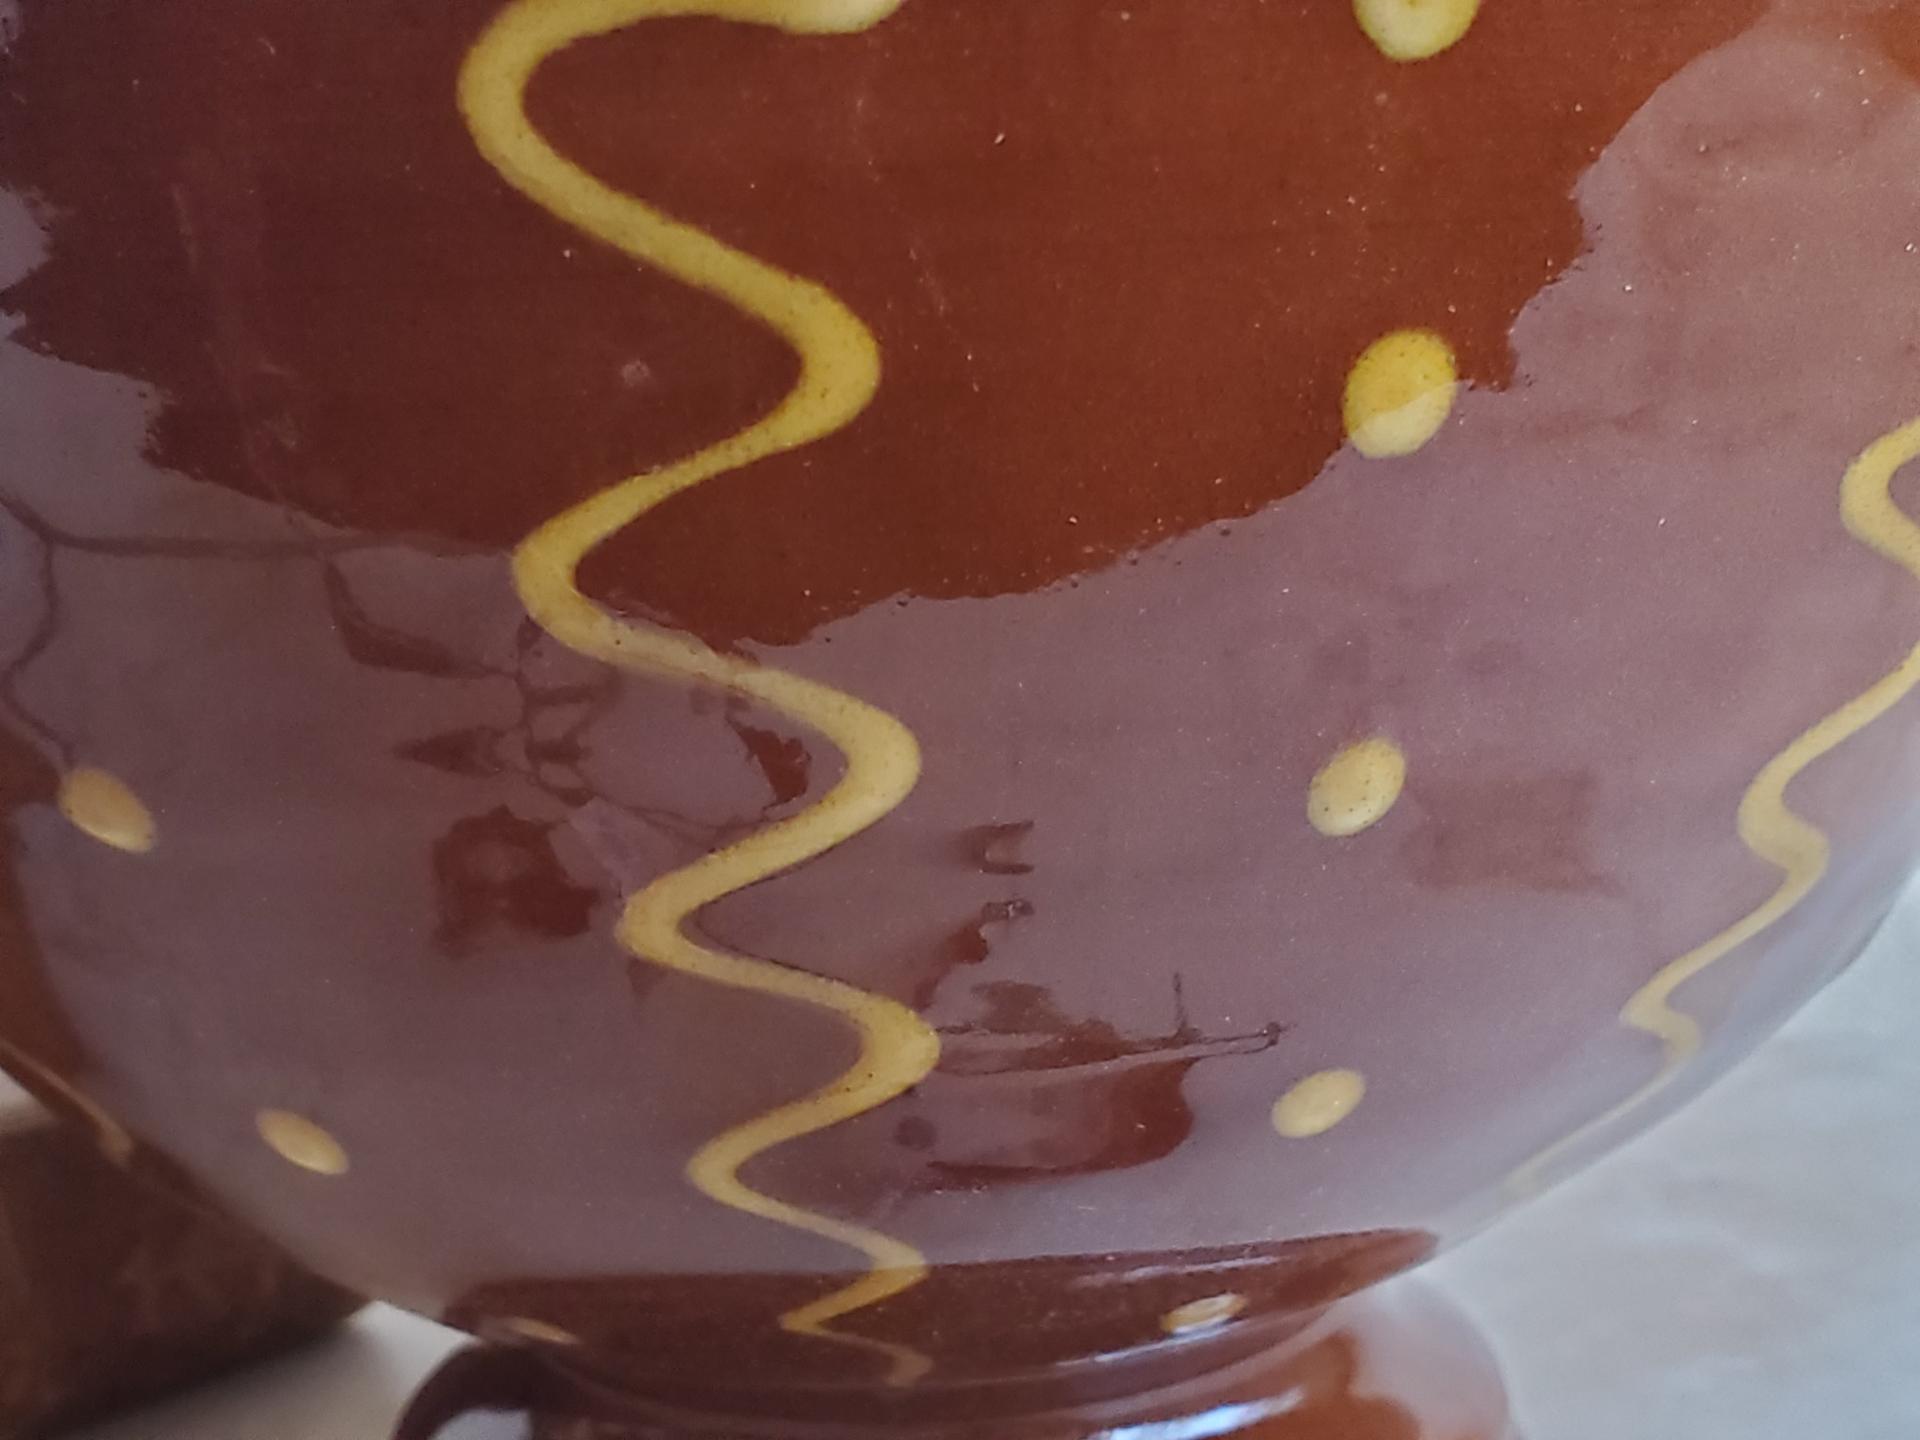 Redware Fruit Bowl with Squiggles & Dots Pattern